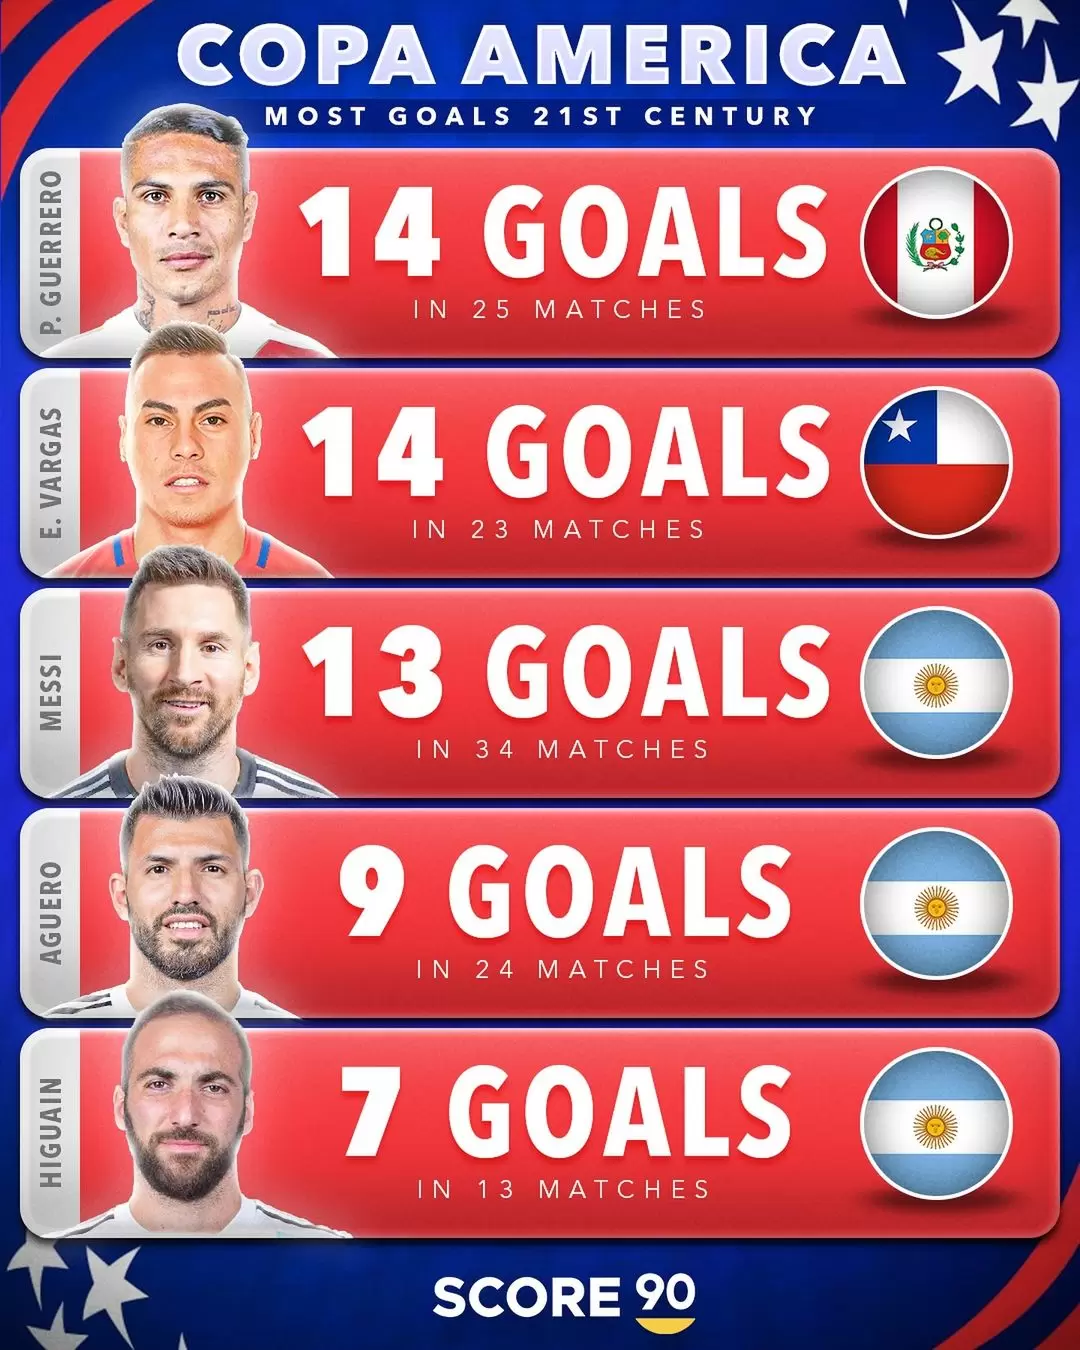 Top 5 - Most goals at UEFA Euro and Copa América in the 21st century  ️ ️ (1).jpg